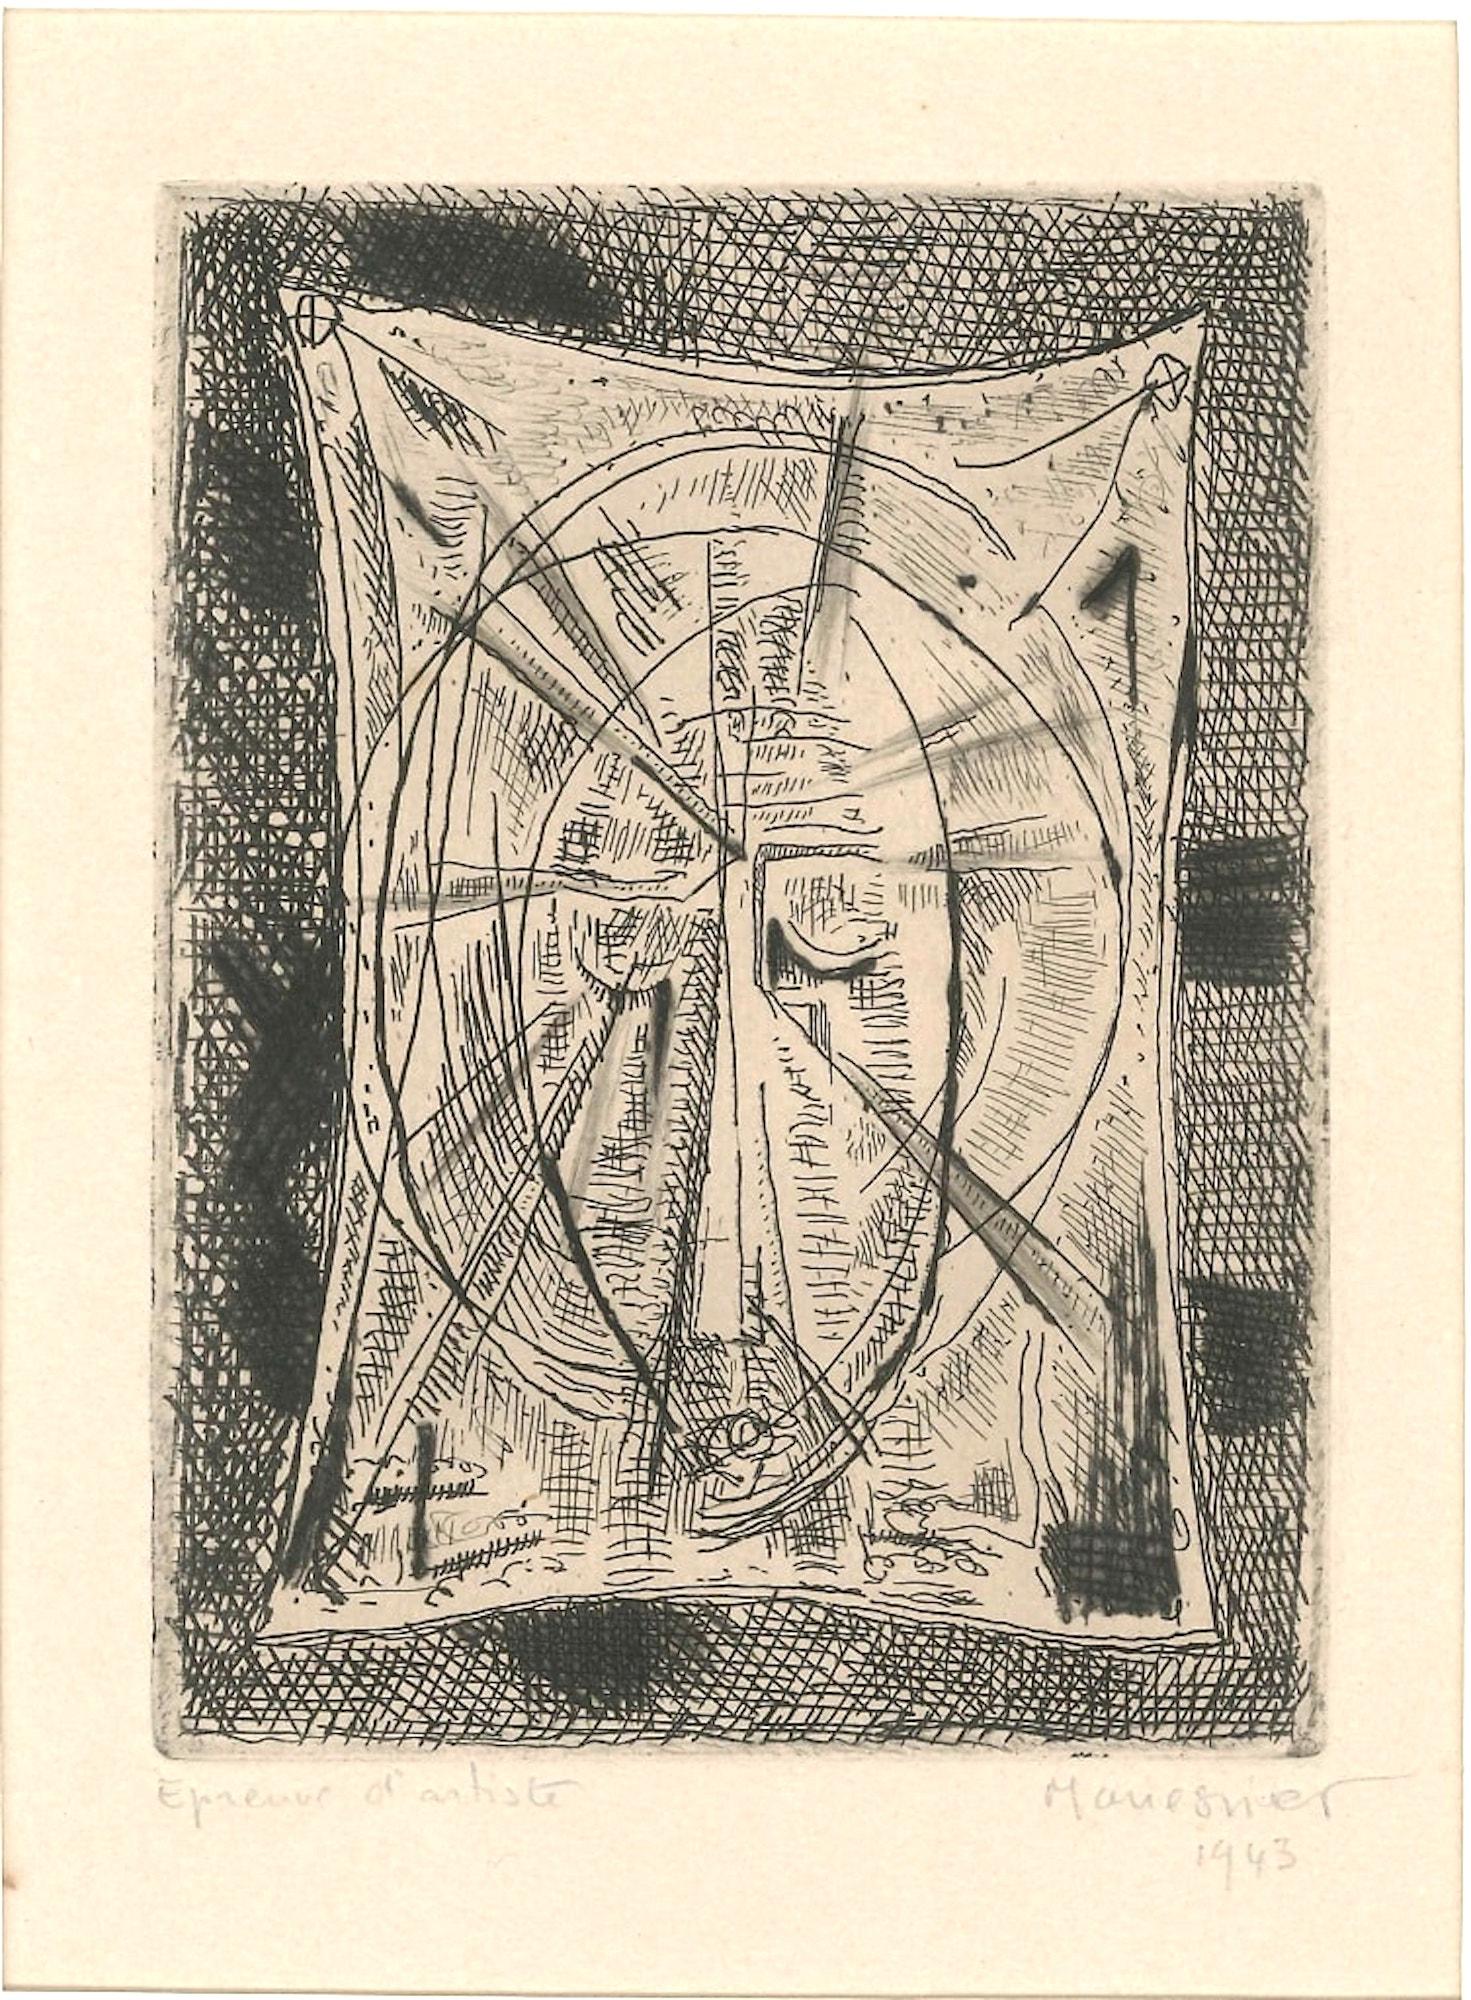 Alfred Meissner Abstract Print - Sacred Composition - Original Etching by Alfred Manessier - 1943